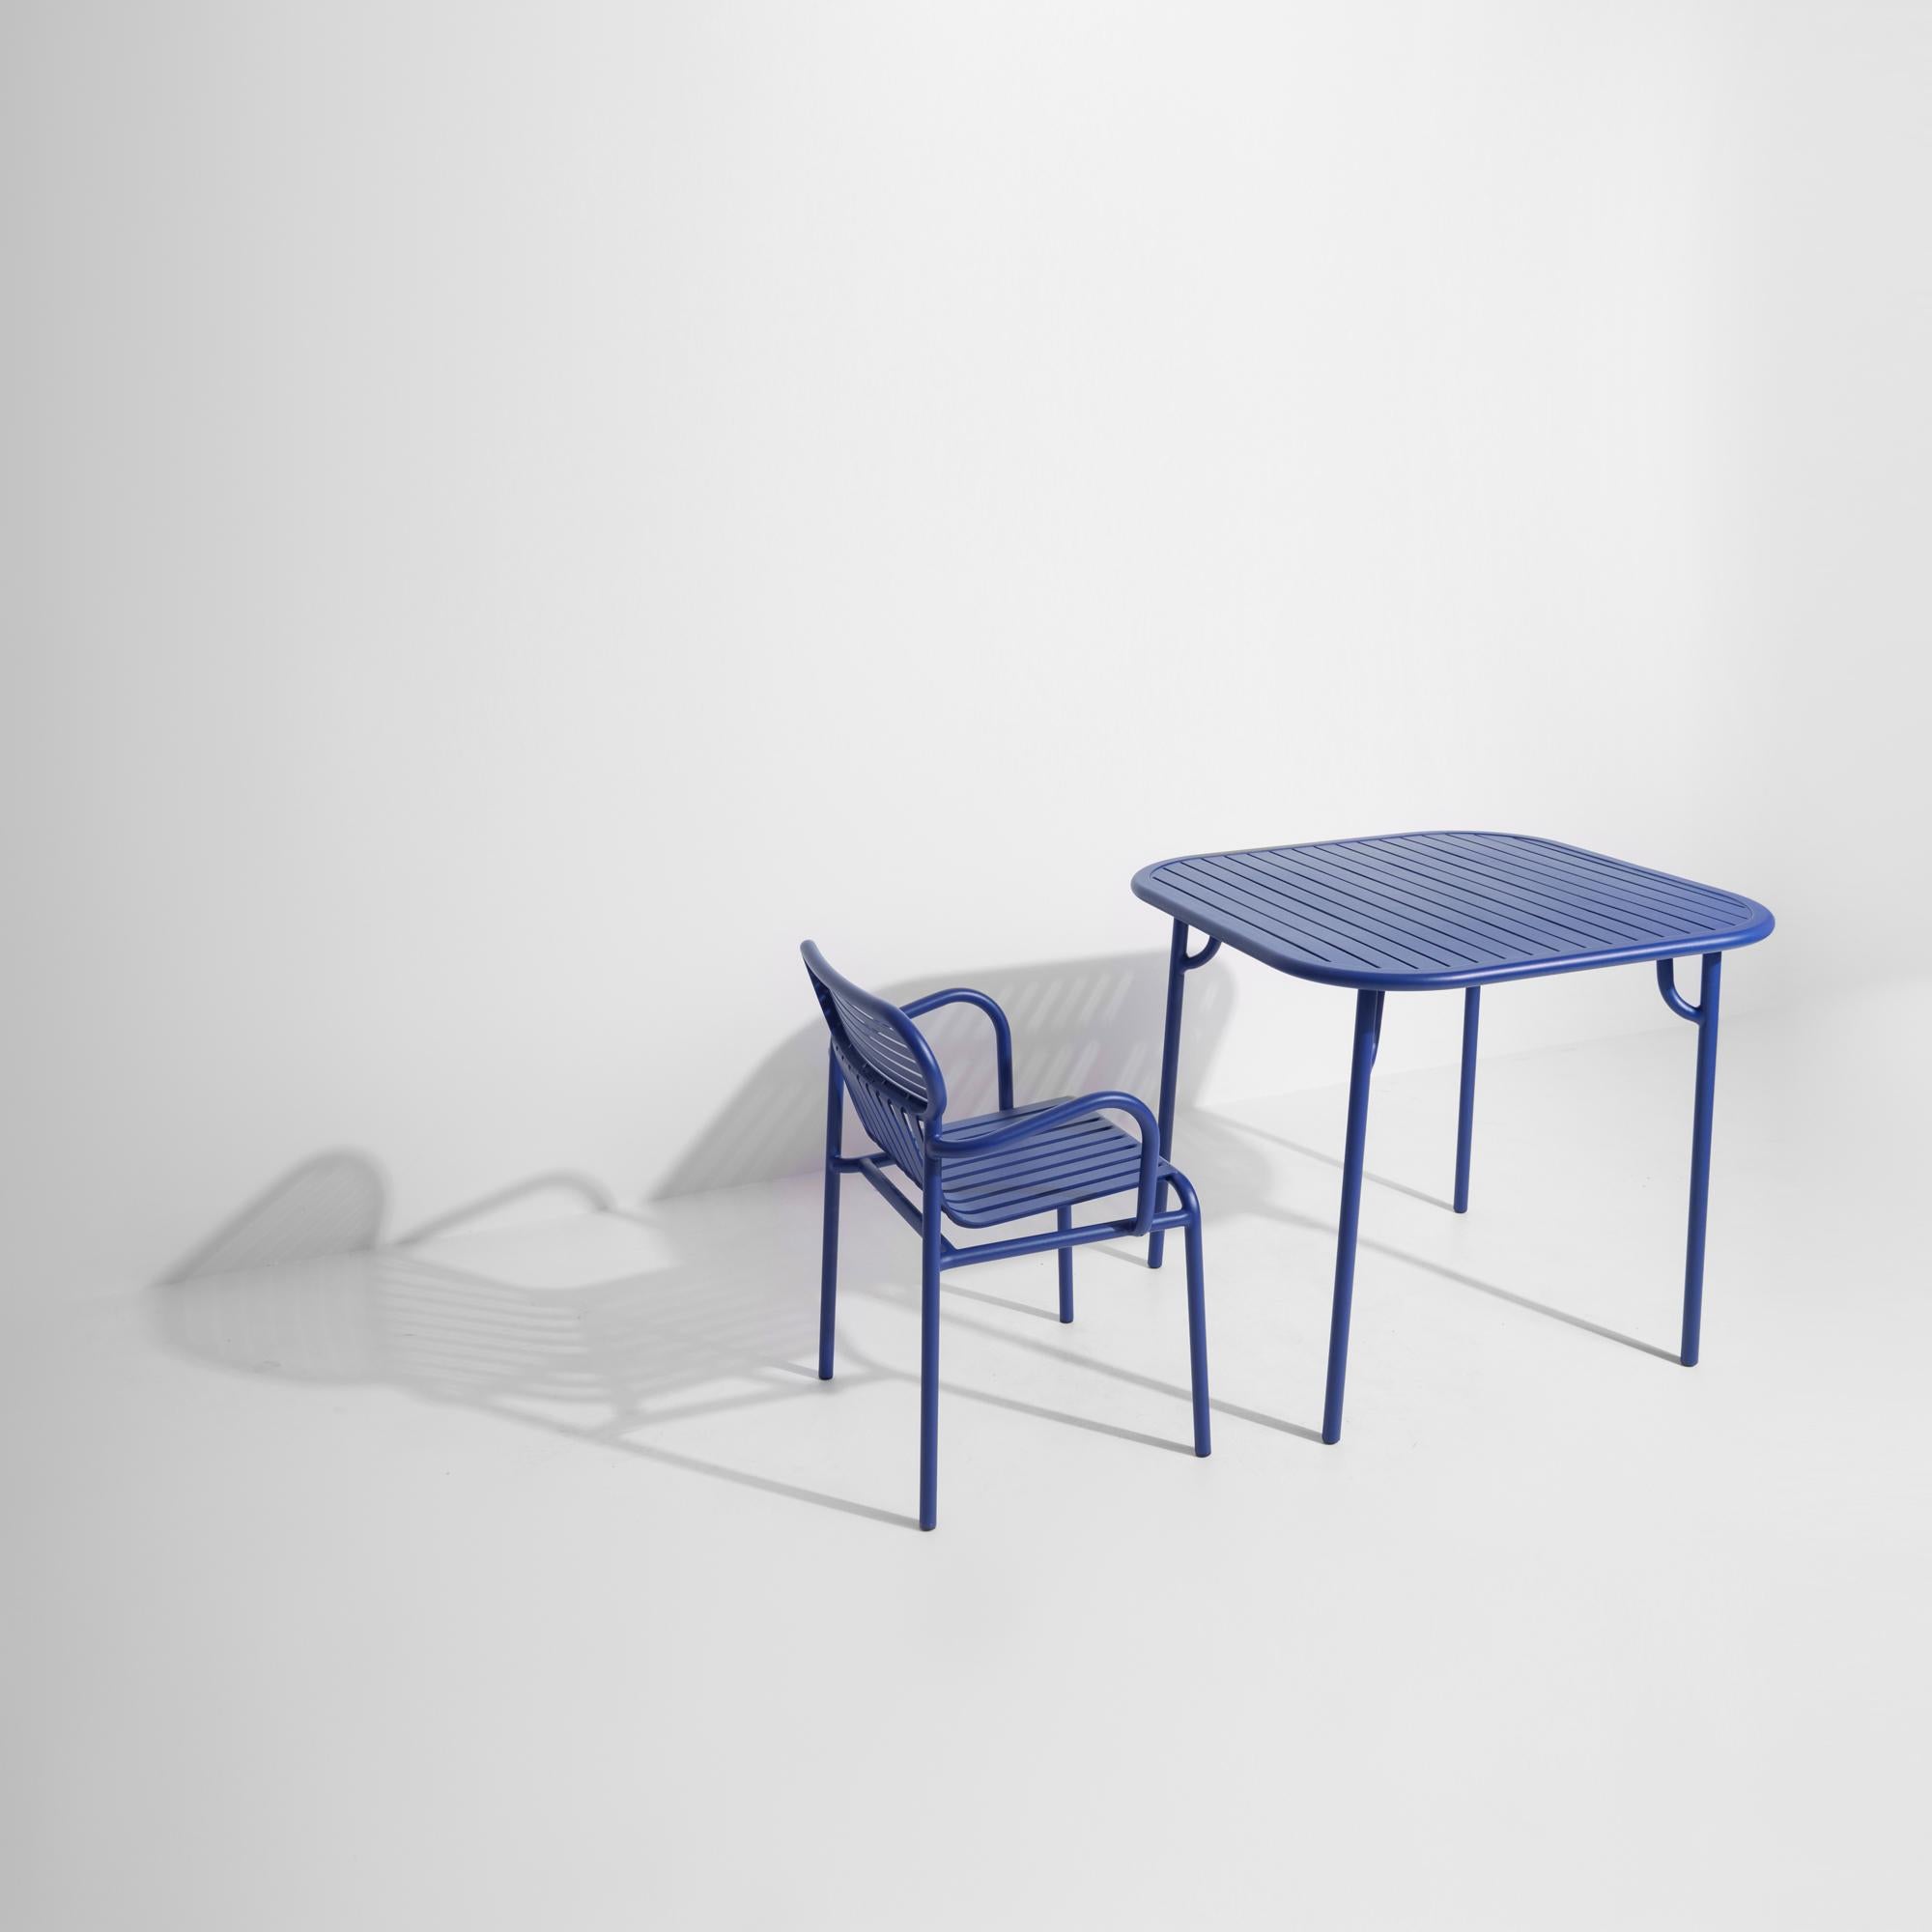 Contemporary Petite Friture Week-End Square Dining Table in Blue Aluminium with Slats For Sale